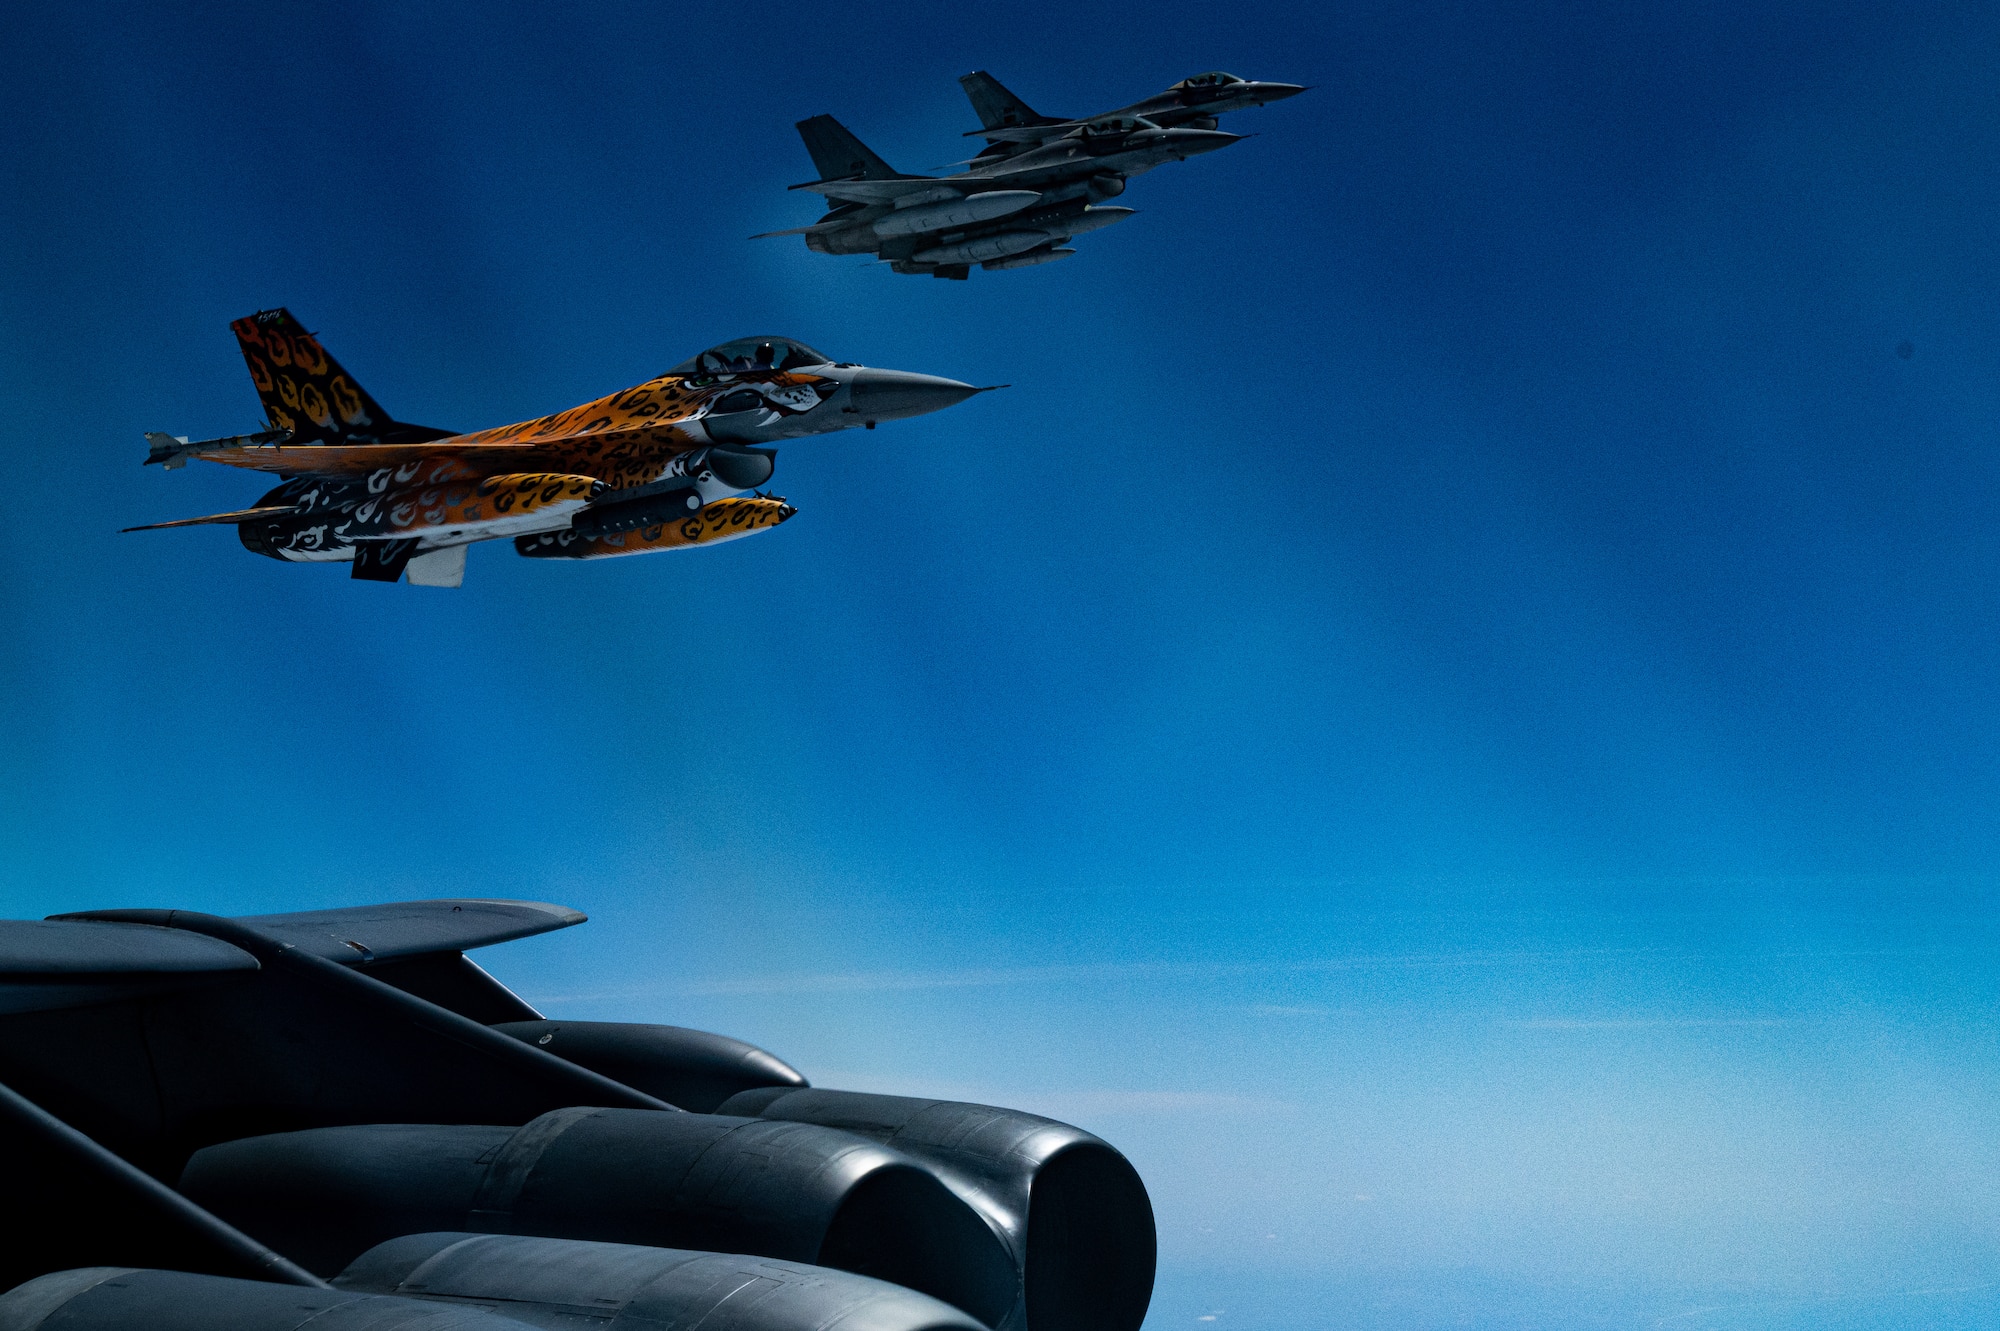 Portuguese F-16's supporting the B-52